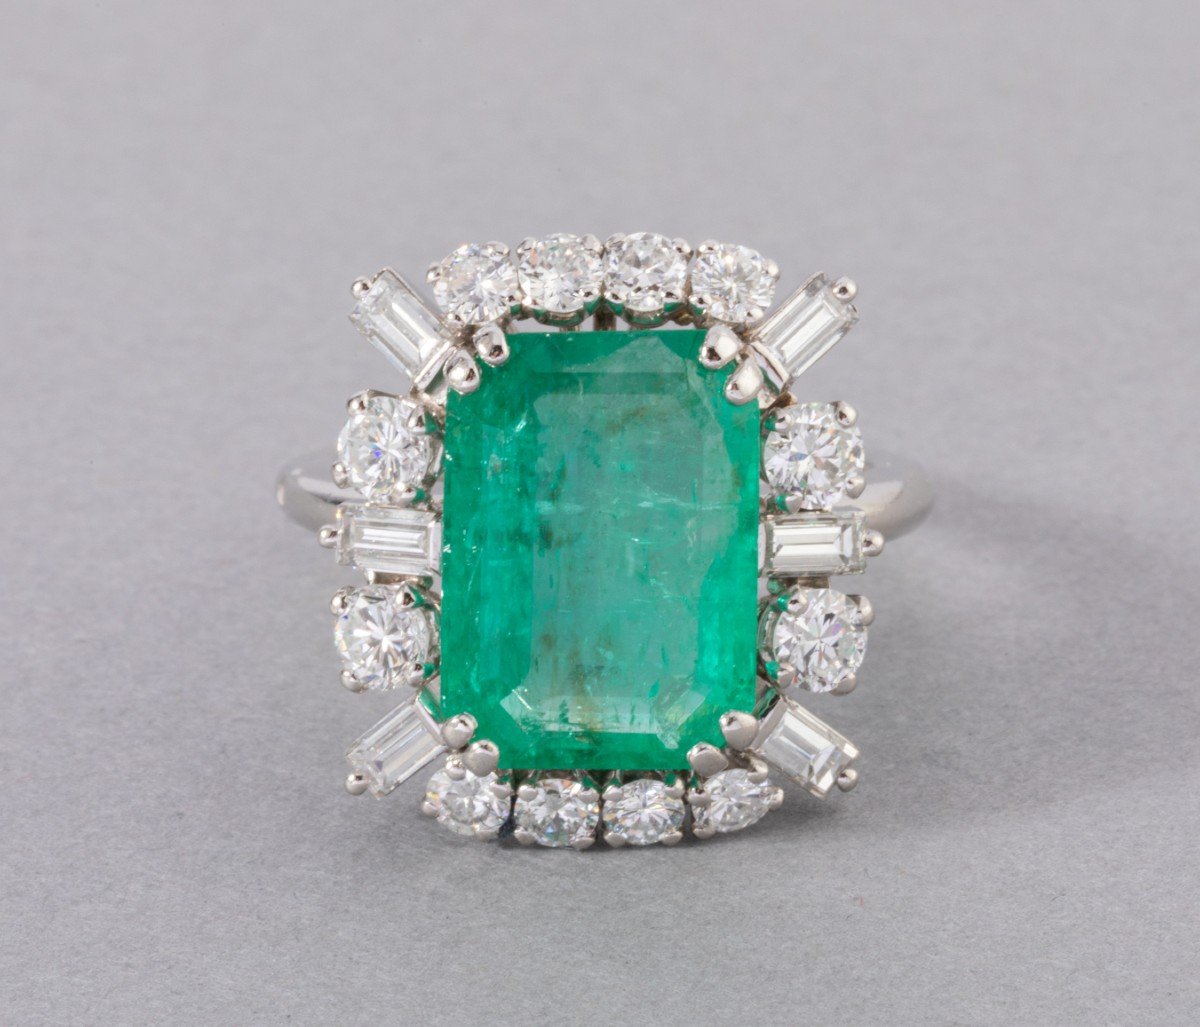 Proantic: Vintage Emerald Ring Of 4.40 Carats And Diamonds By Maubouss